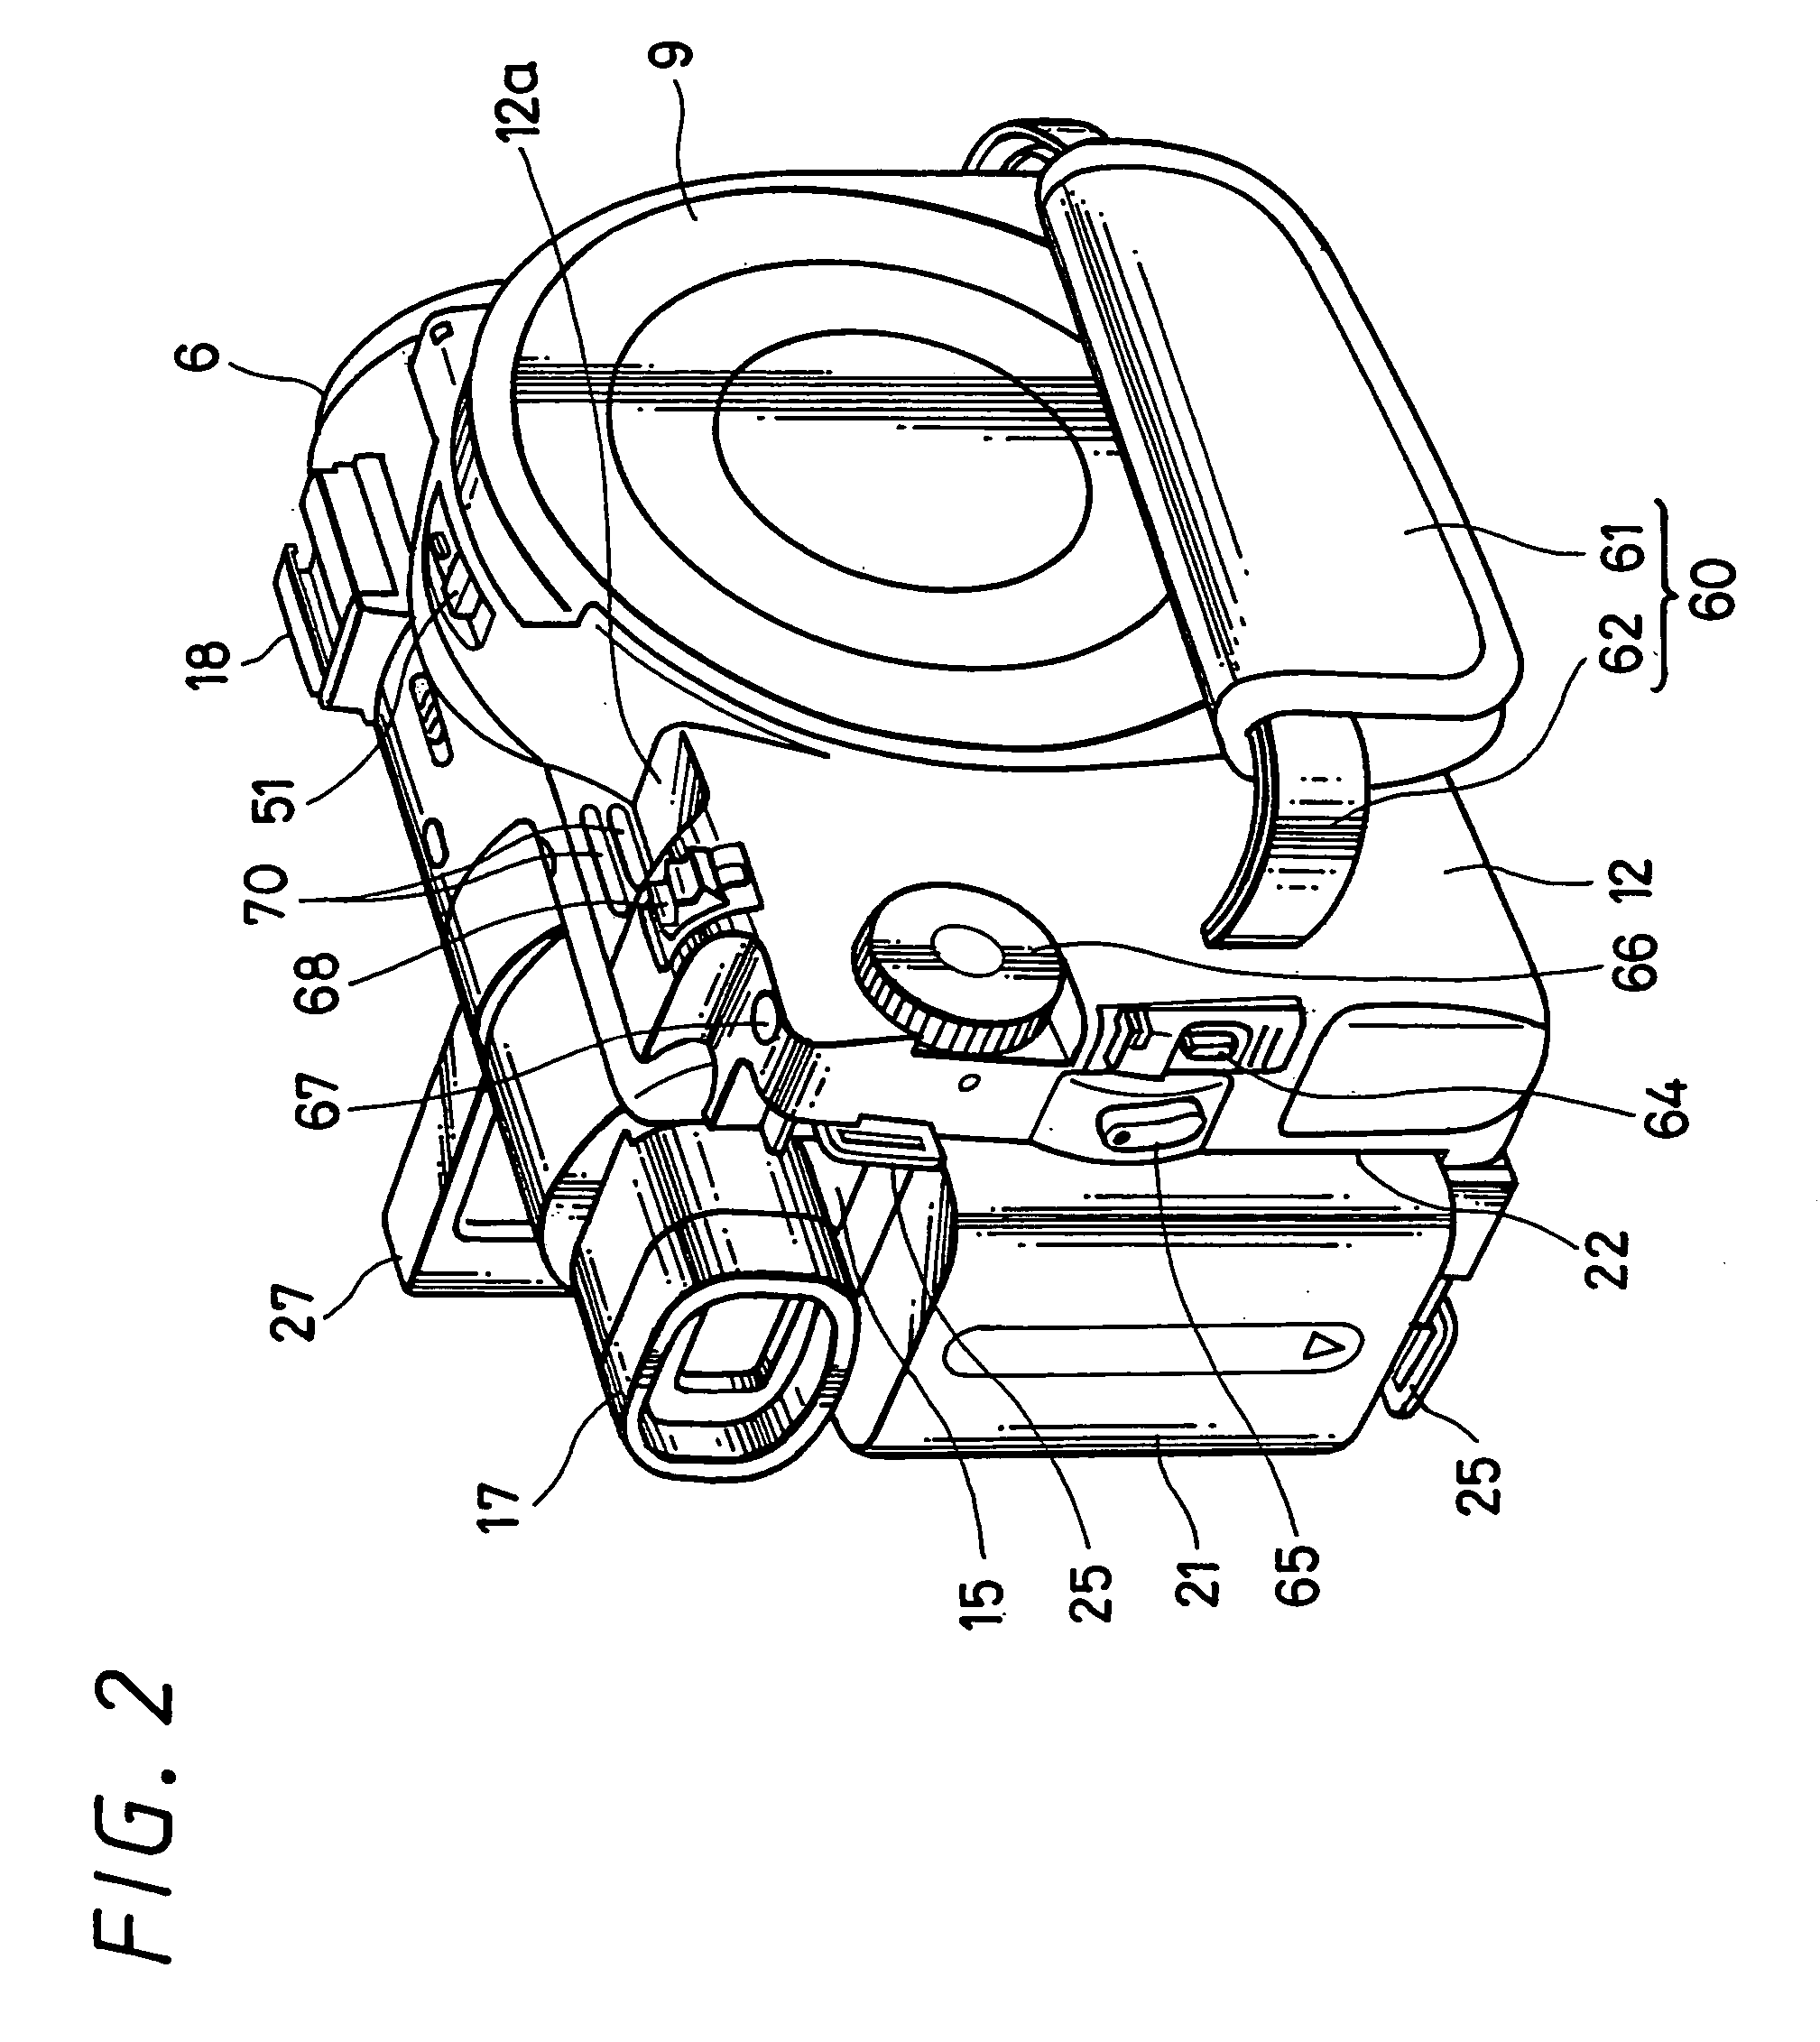 Disc recording and/or reproducing apparatus having a case with a partition wall for forming two chambers